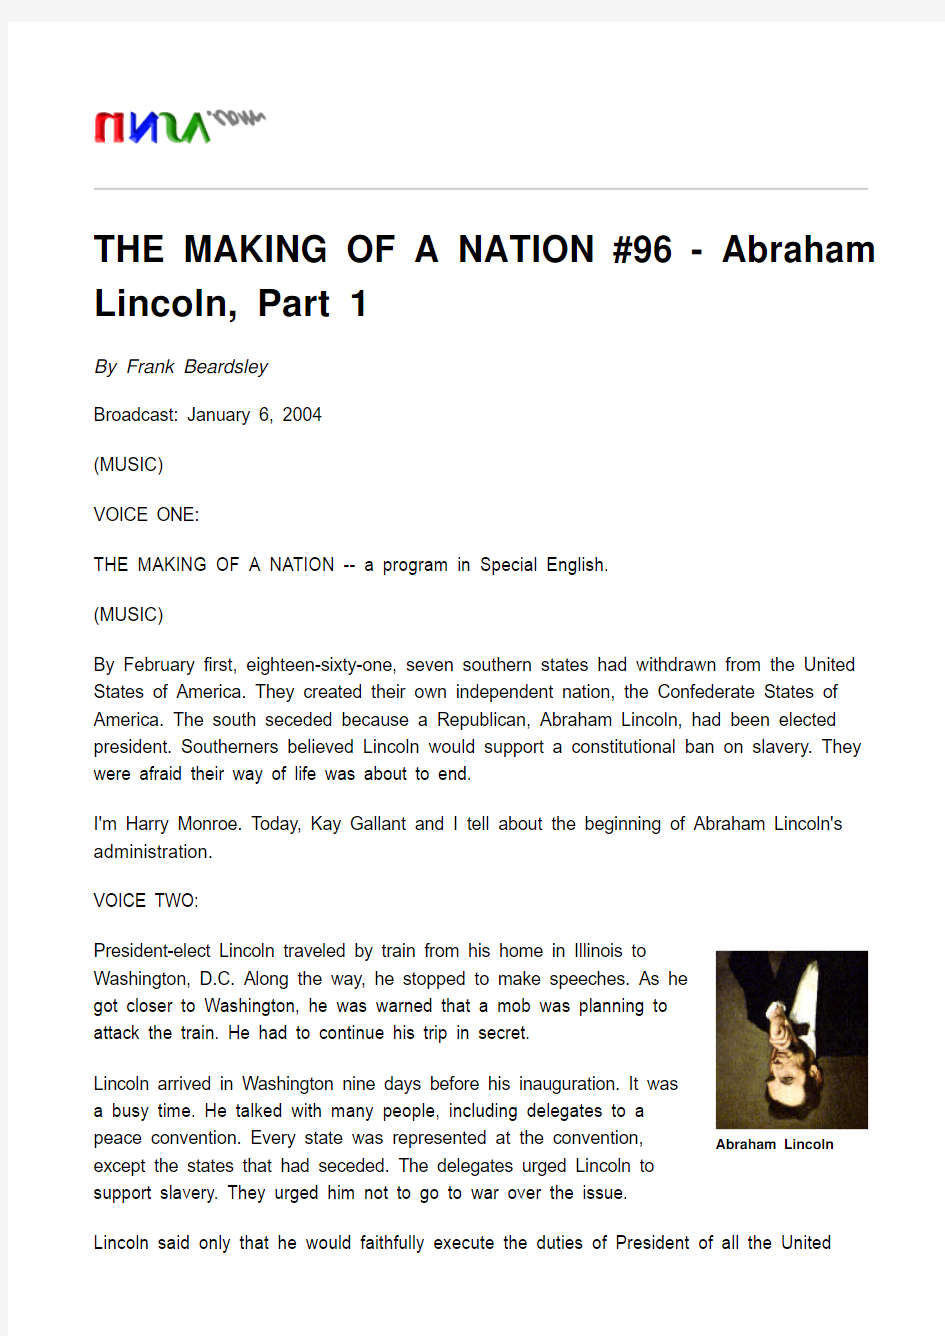 THE MAKING OF A NATION #096 - Abraham Lincoln, Part 1